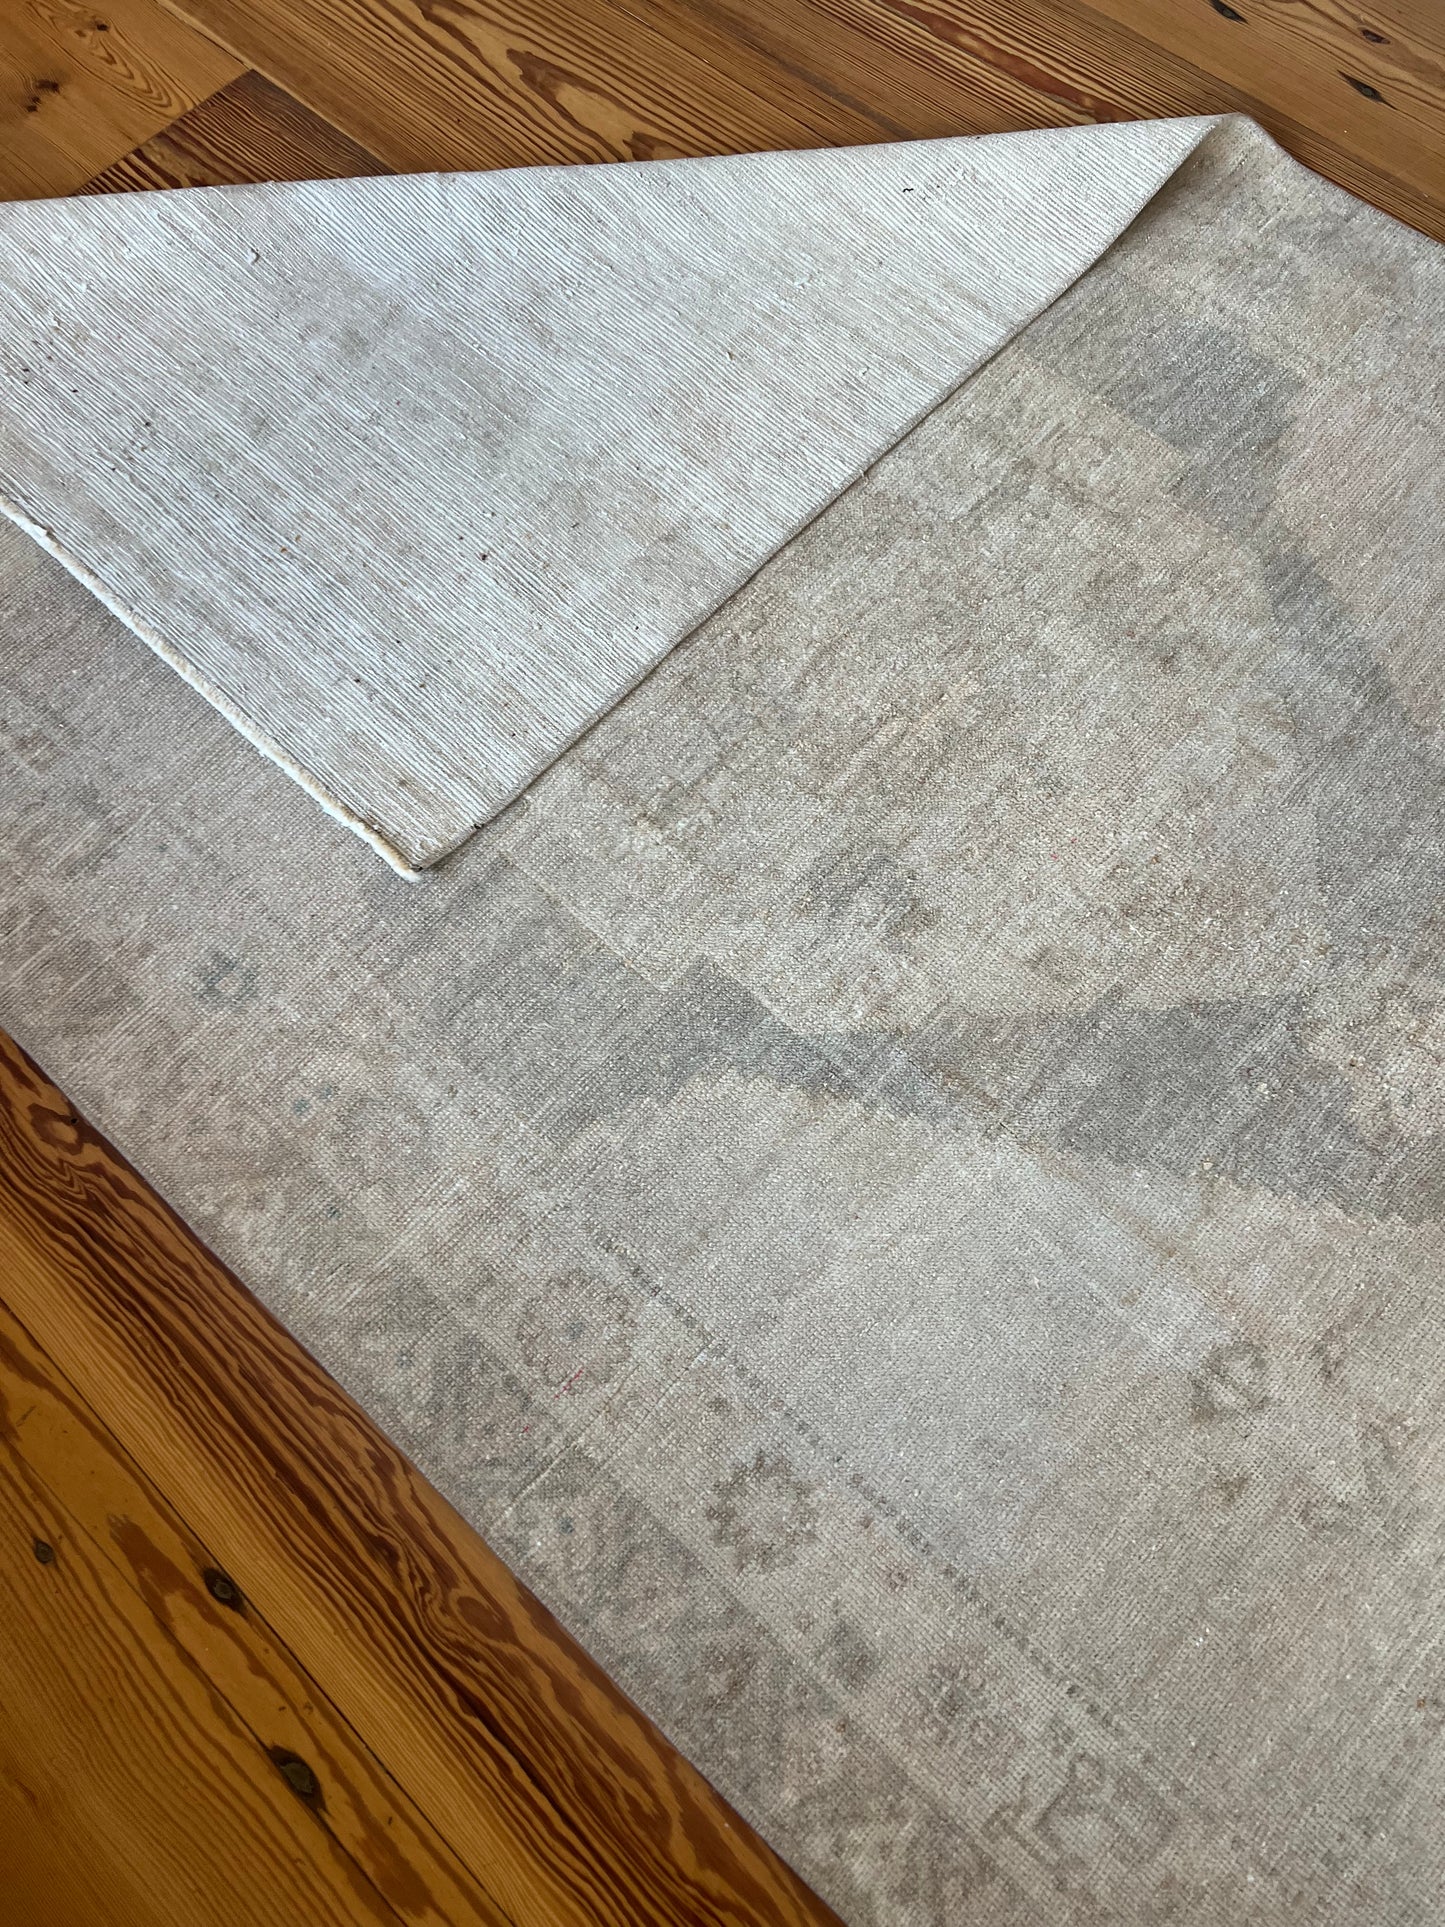 4'2" x 7' Area Rug with Brown and Gray